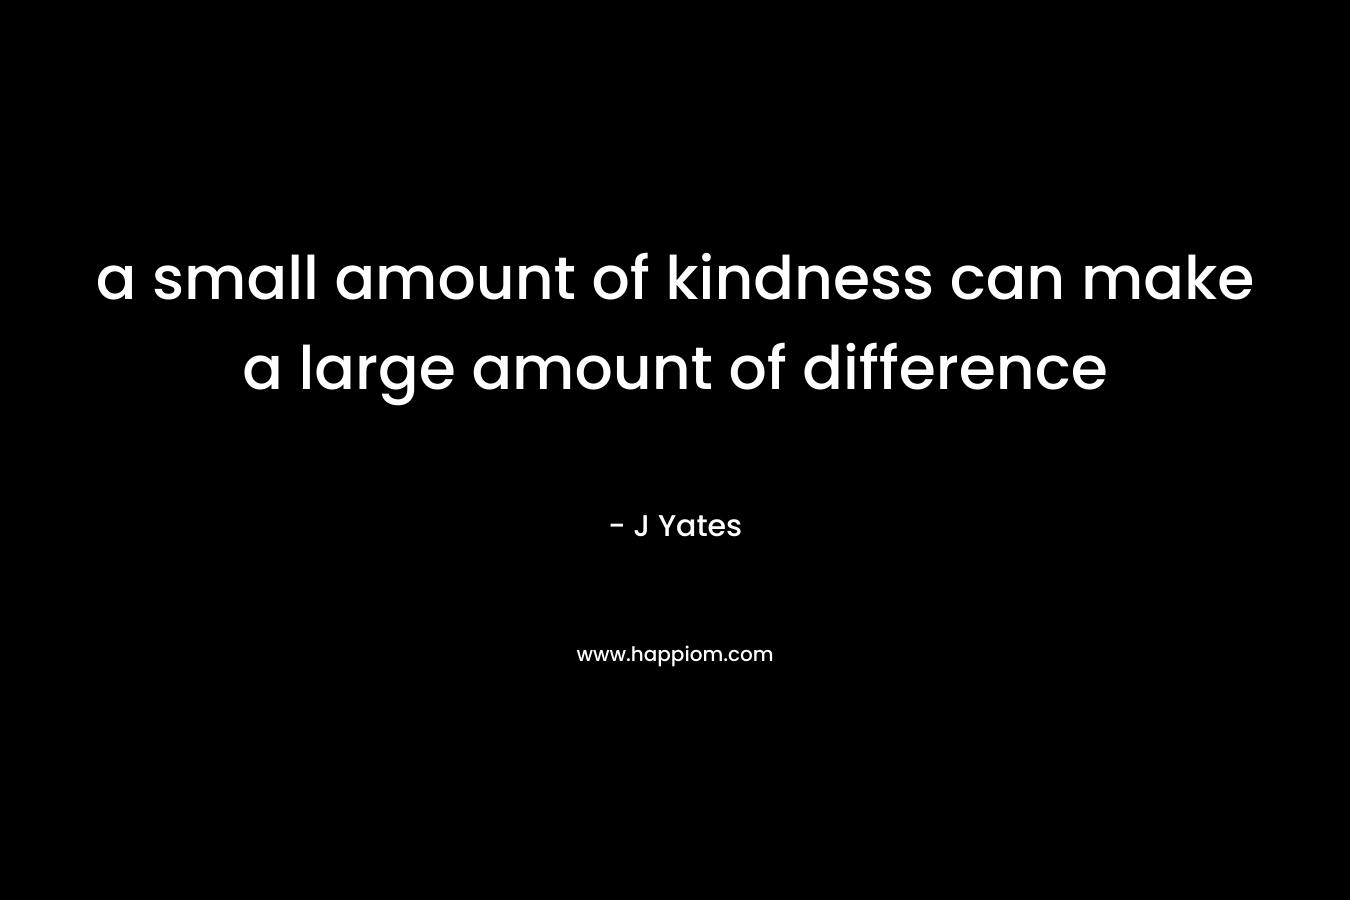 a small amount of kindness can make a large amount of difference